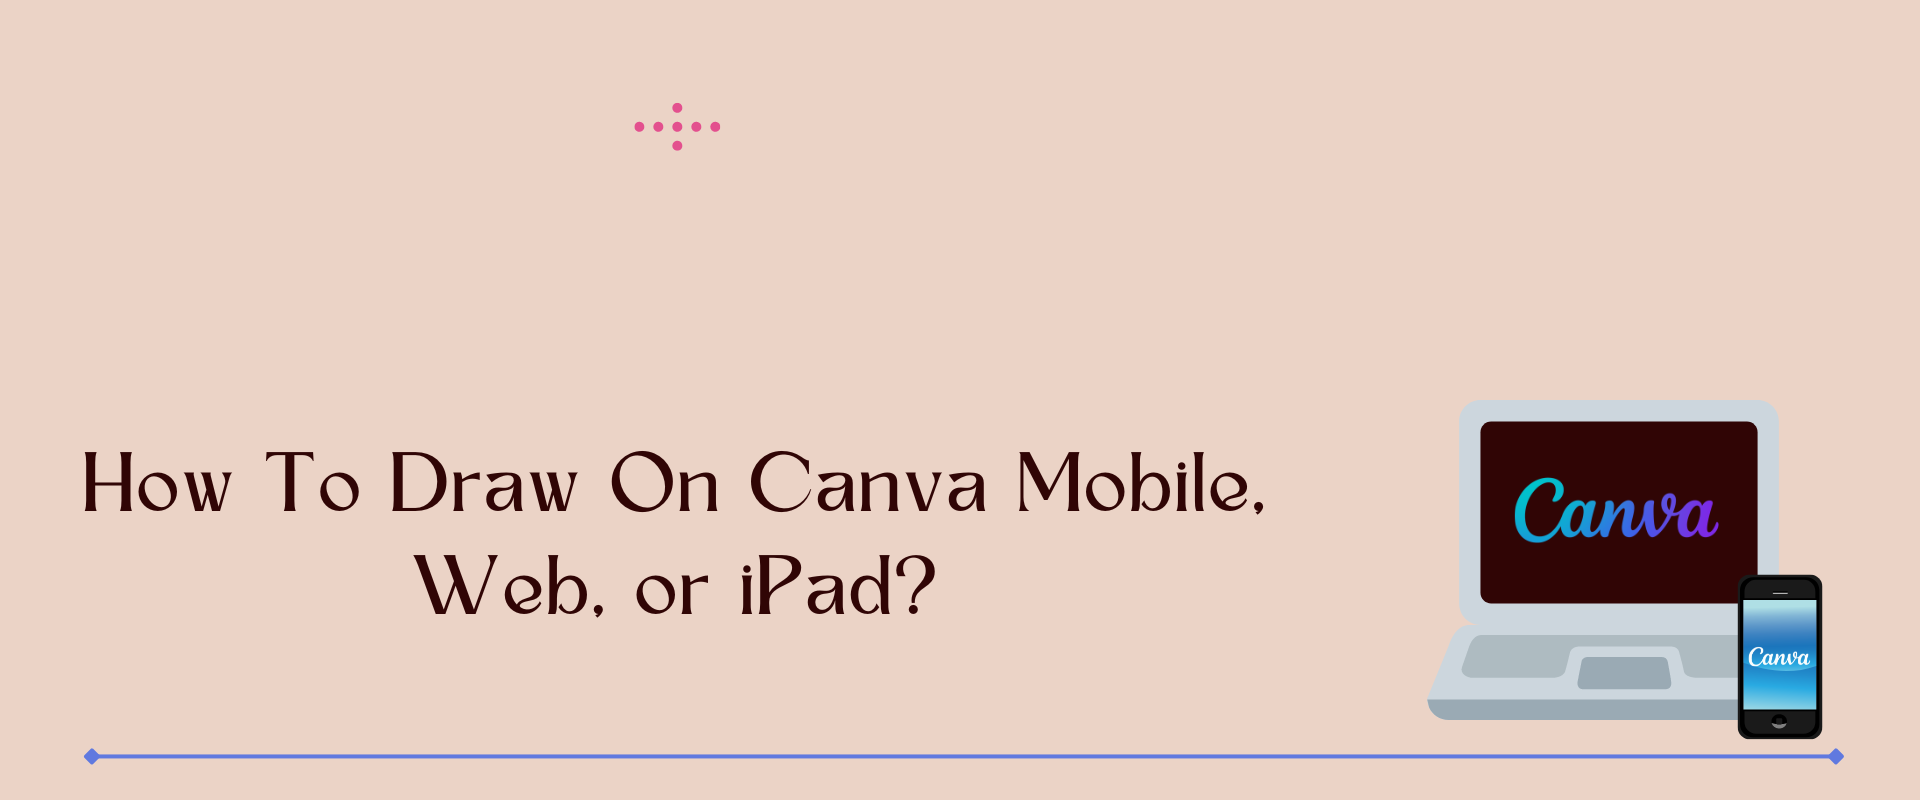 How To Draw On Canva Mobile, Web, or iPad?